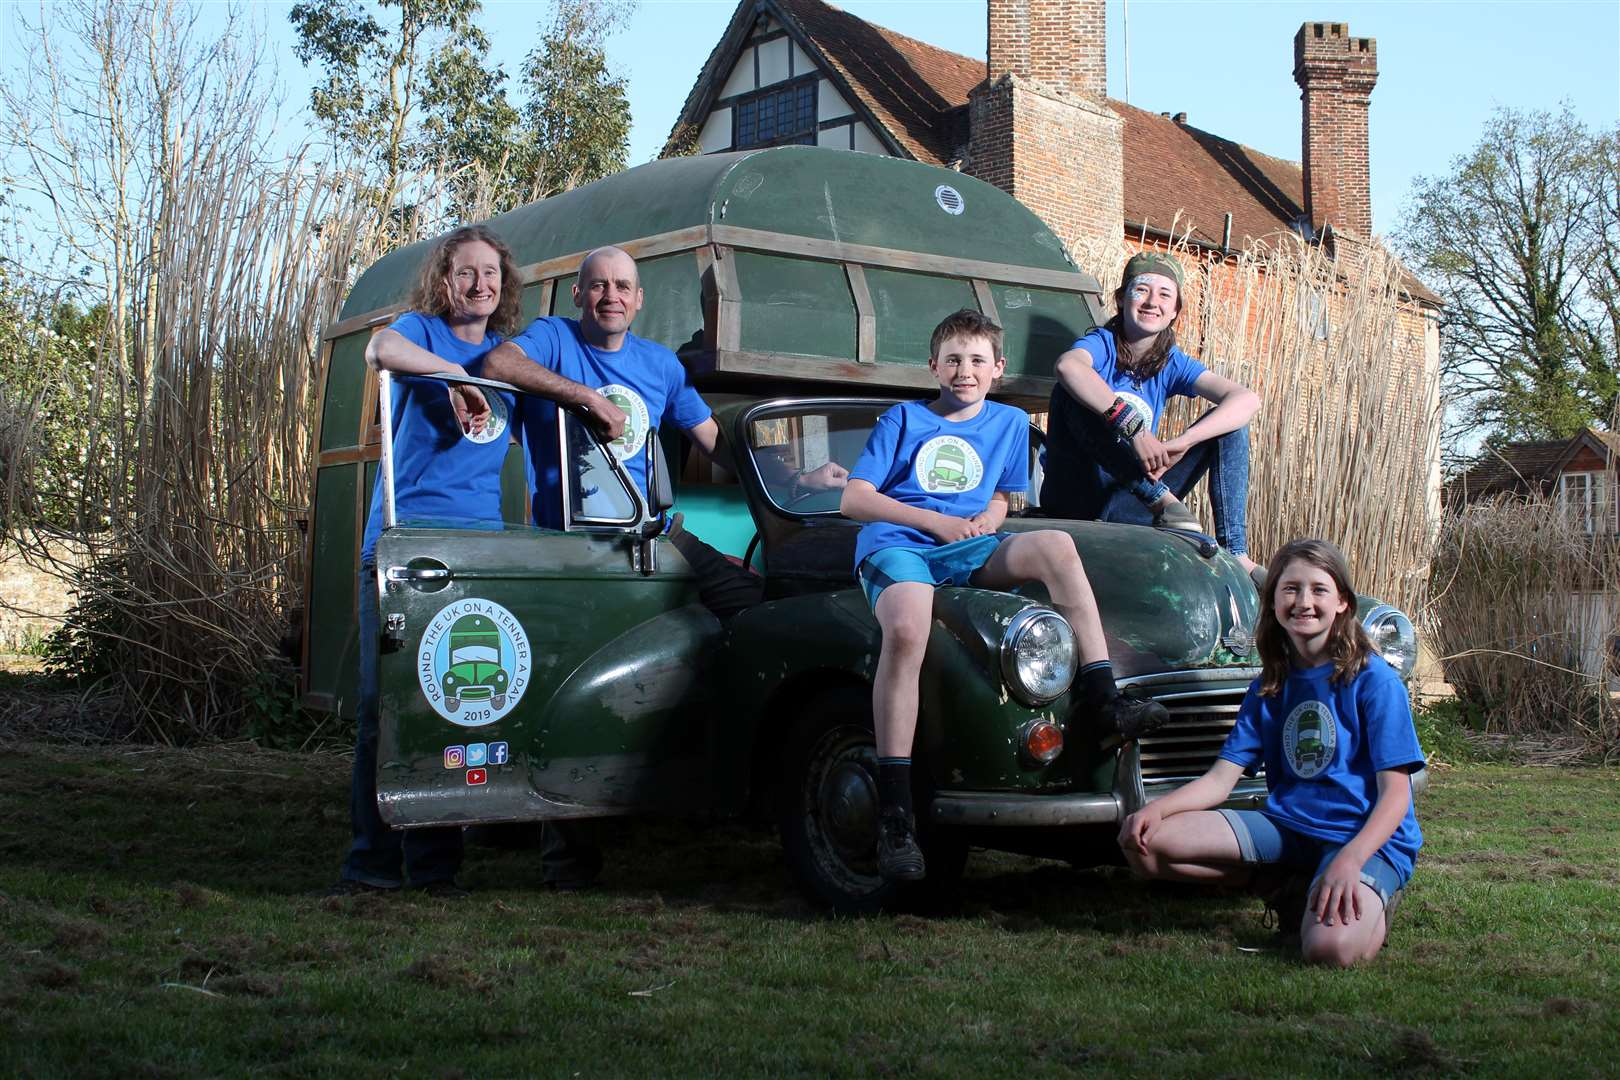 The Chick family perched on their vintage campervan.